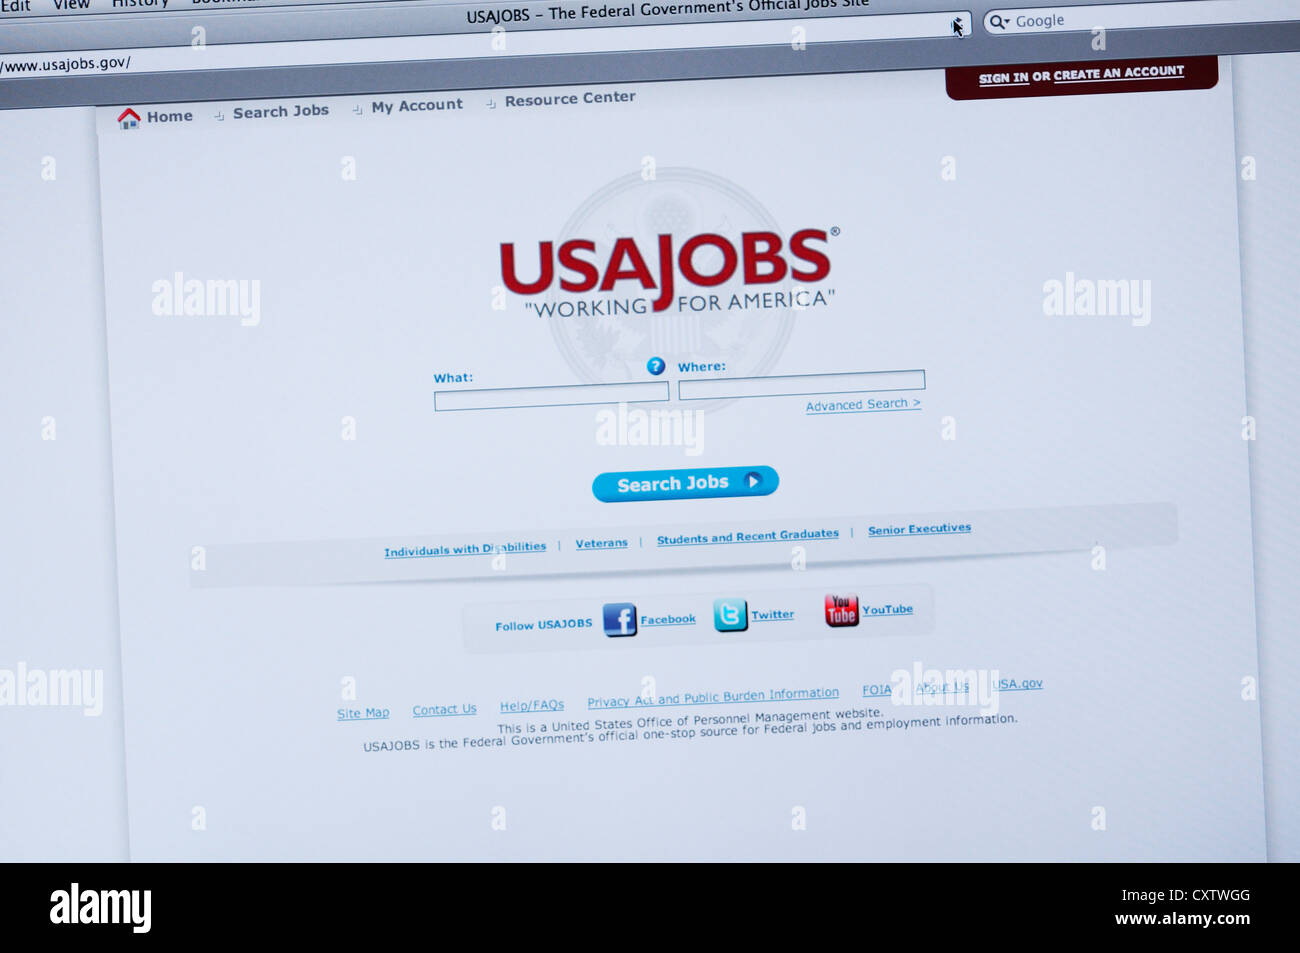 Usajobs Website The Federal Governments Official Job List Stock